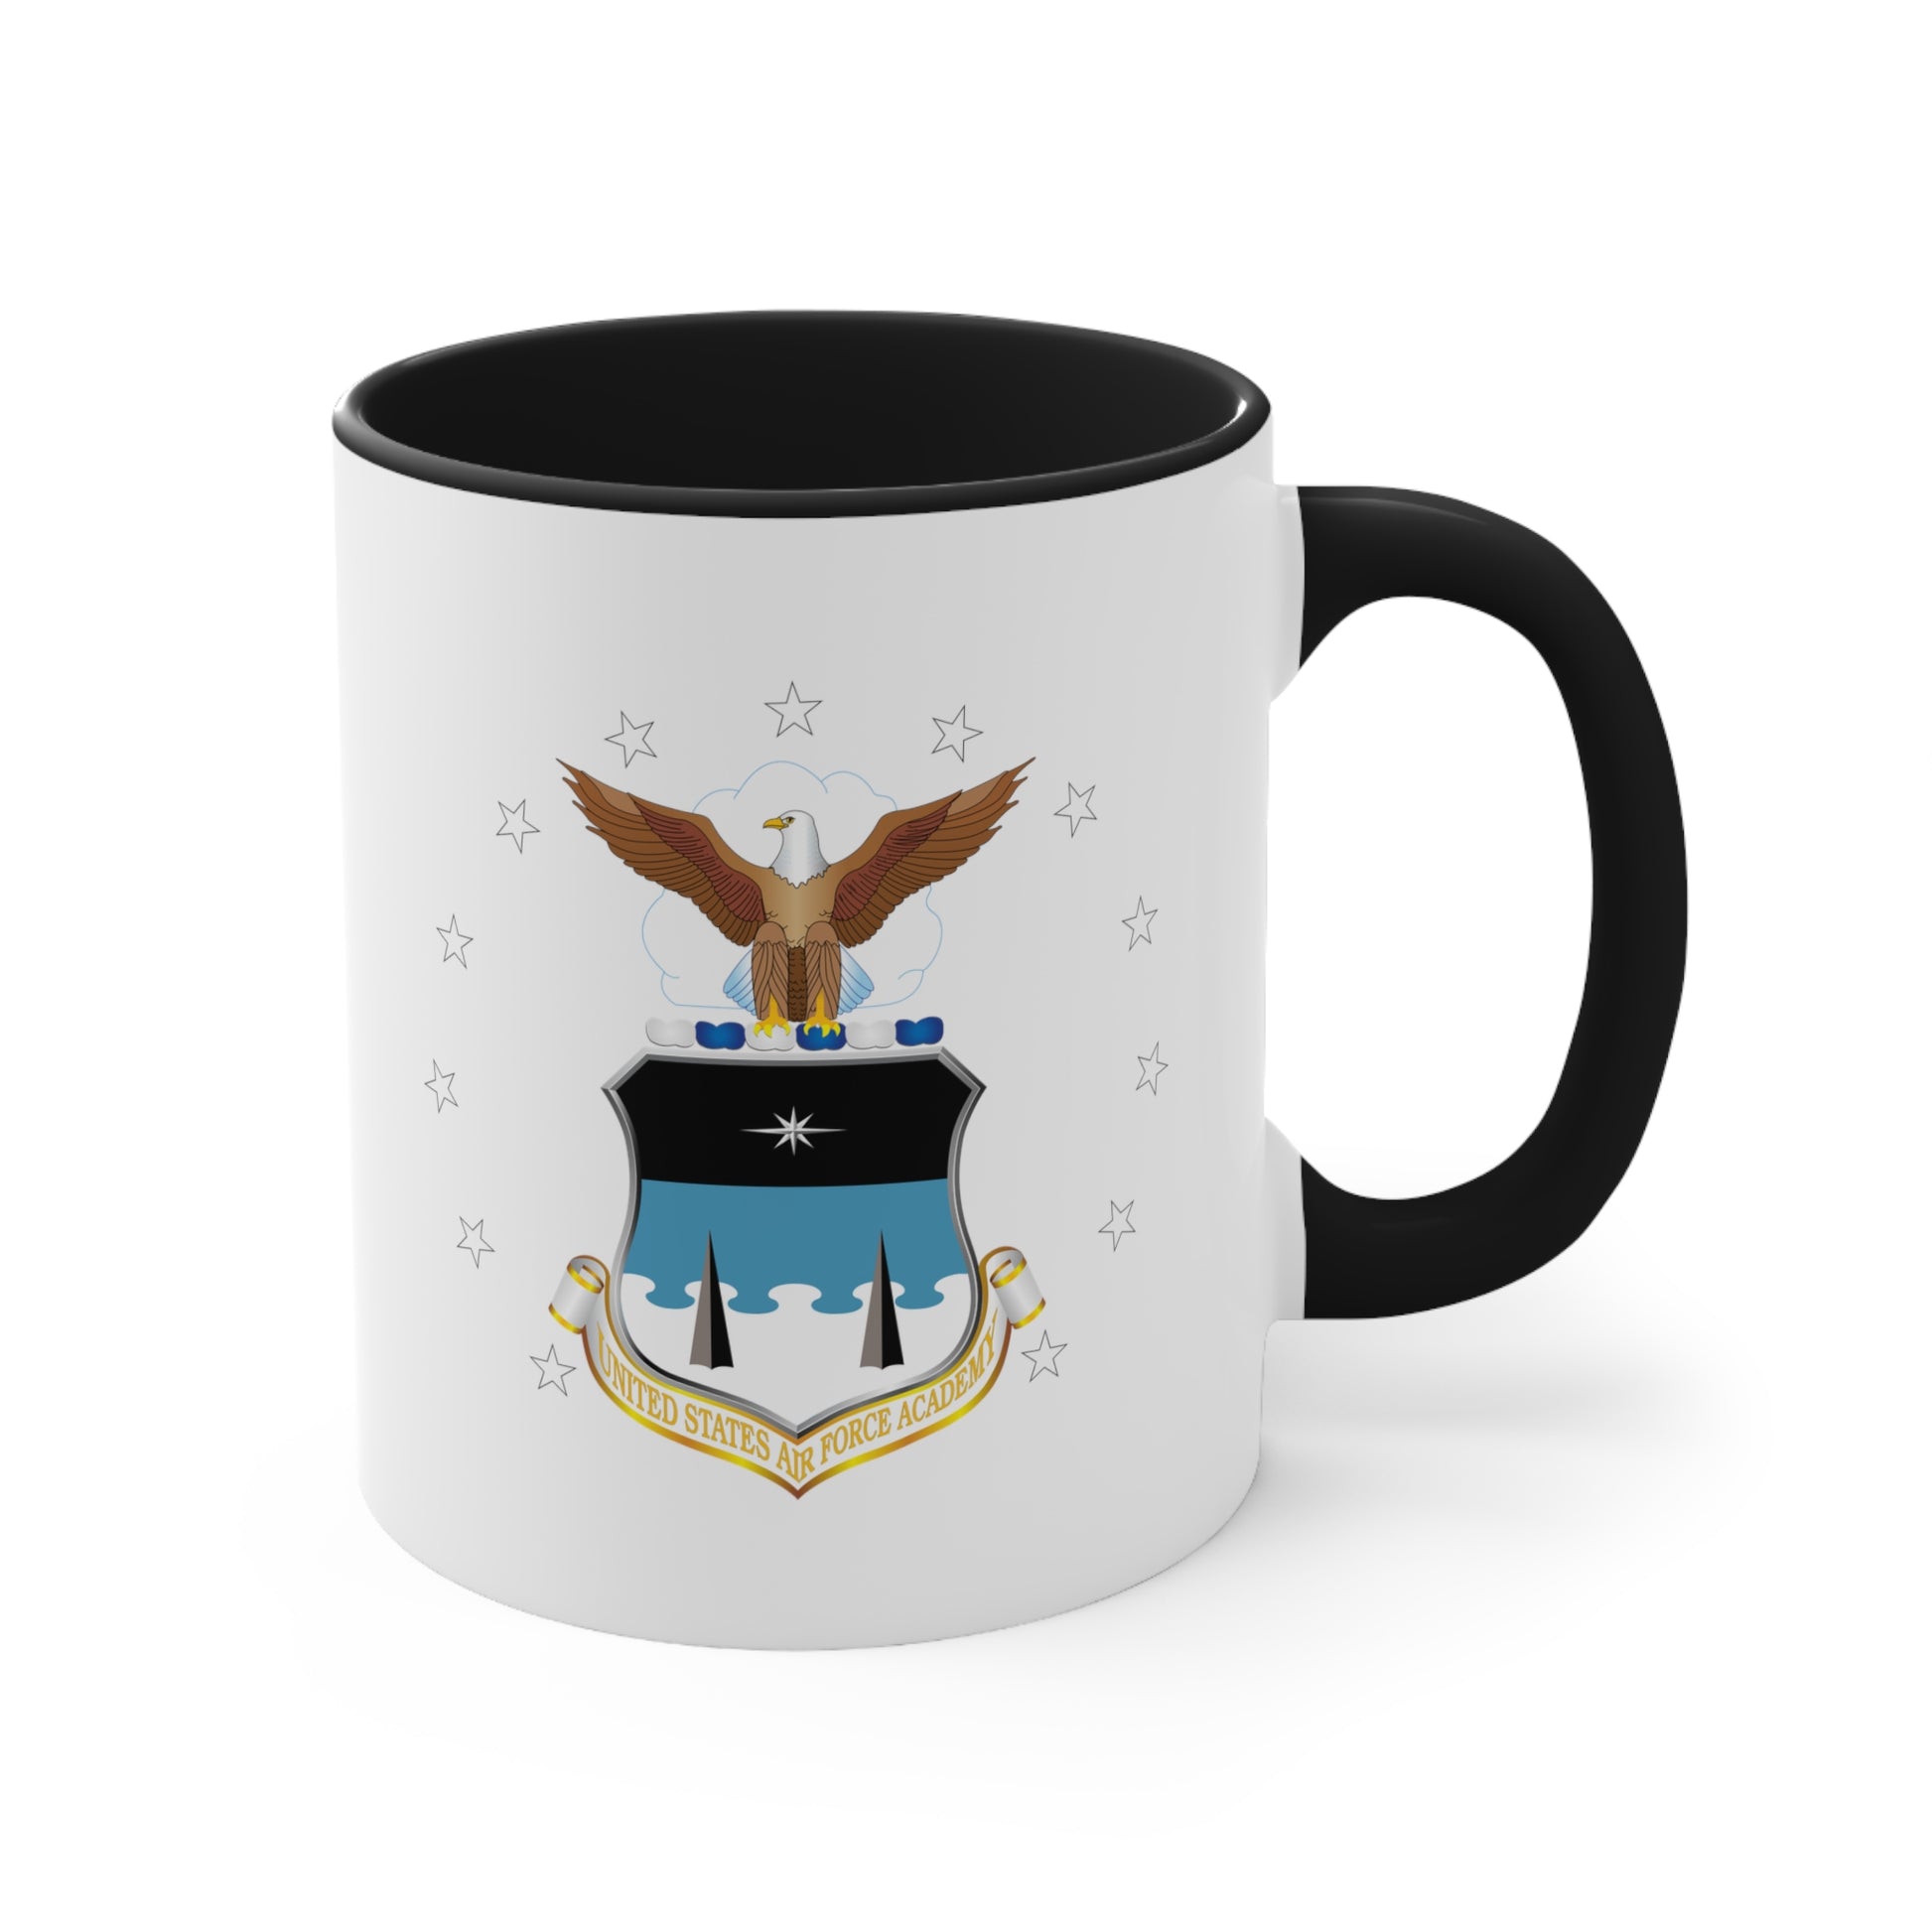 US Air Force Academy Coffee Mug - Double Sided Black Accent White Ceramic 11oz by TheGlassyLass.com